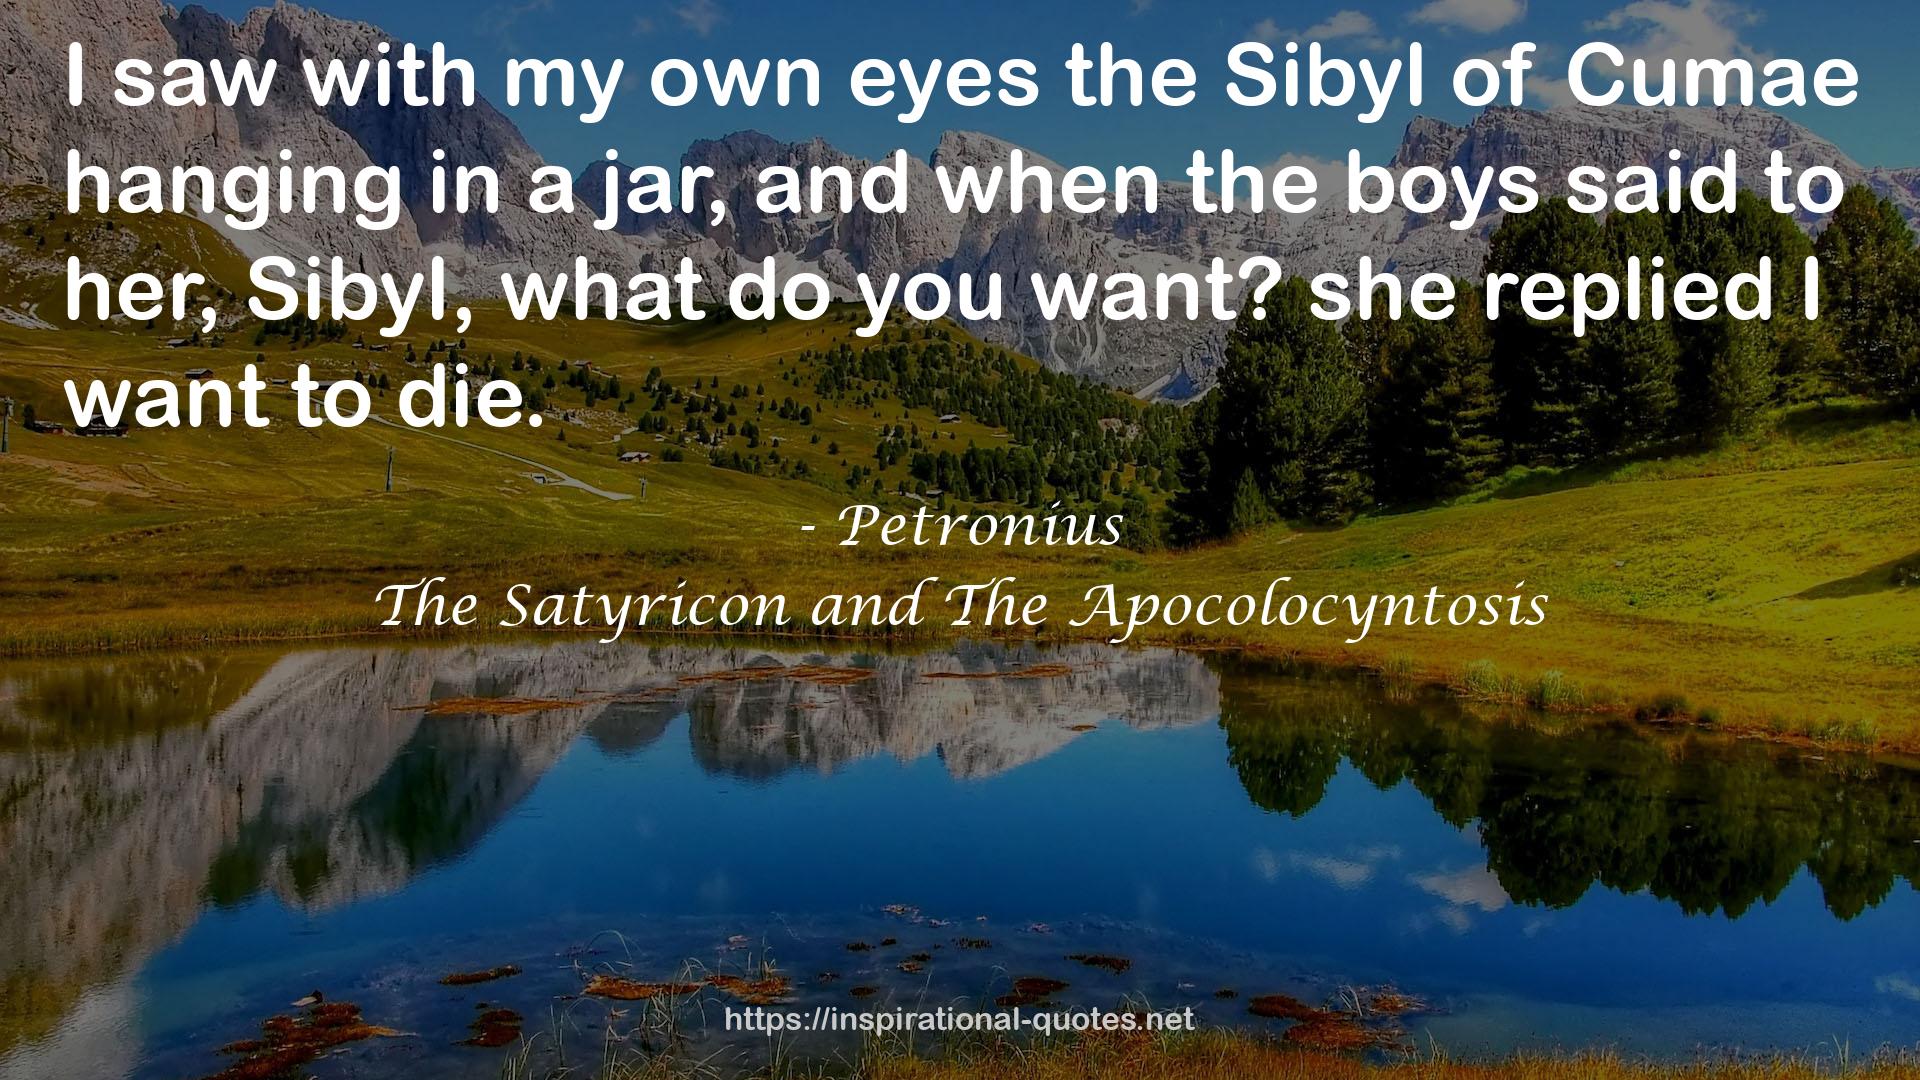 The Satyricon and The Apocolocyntosis QUOTES